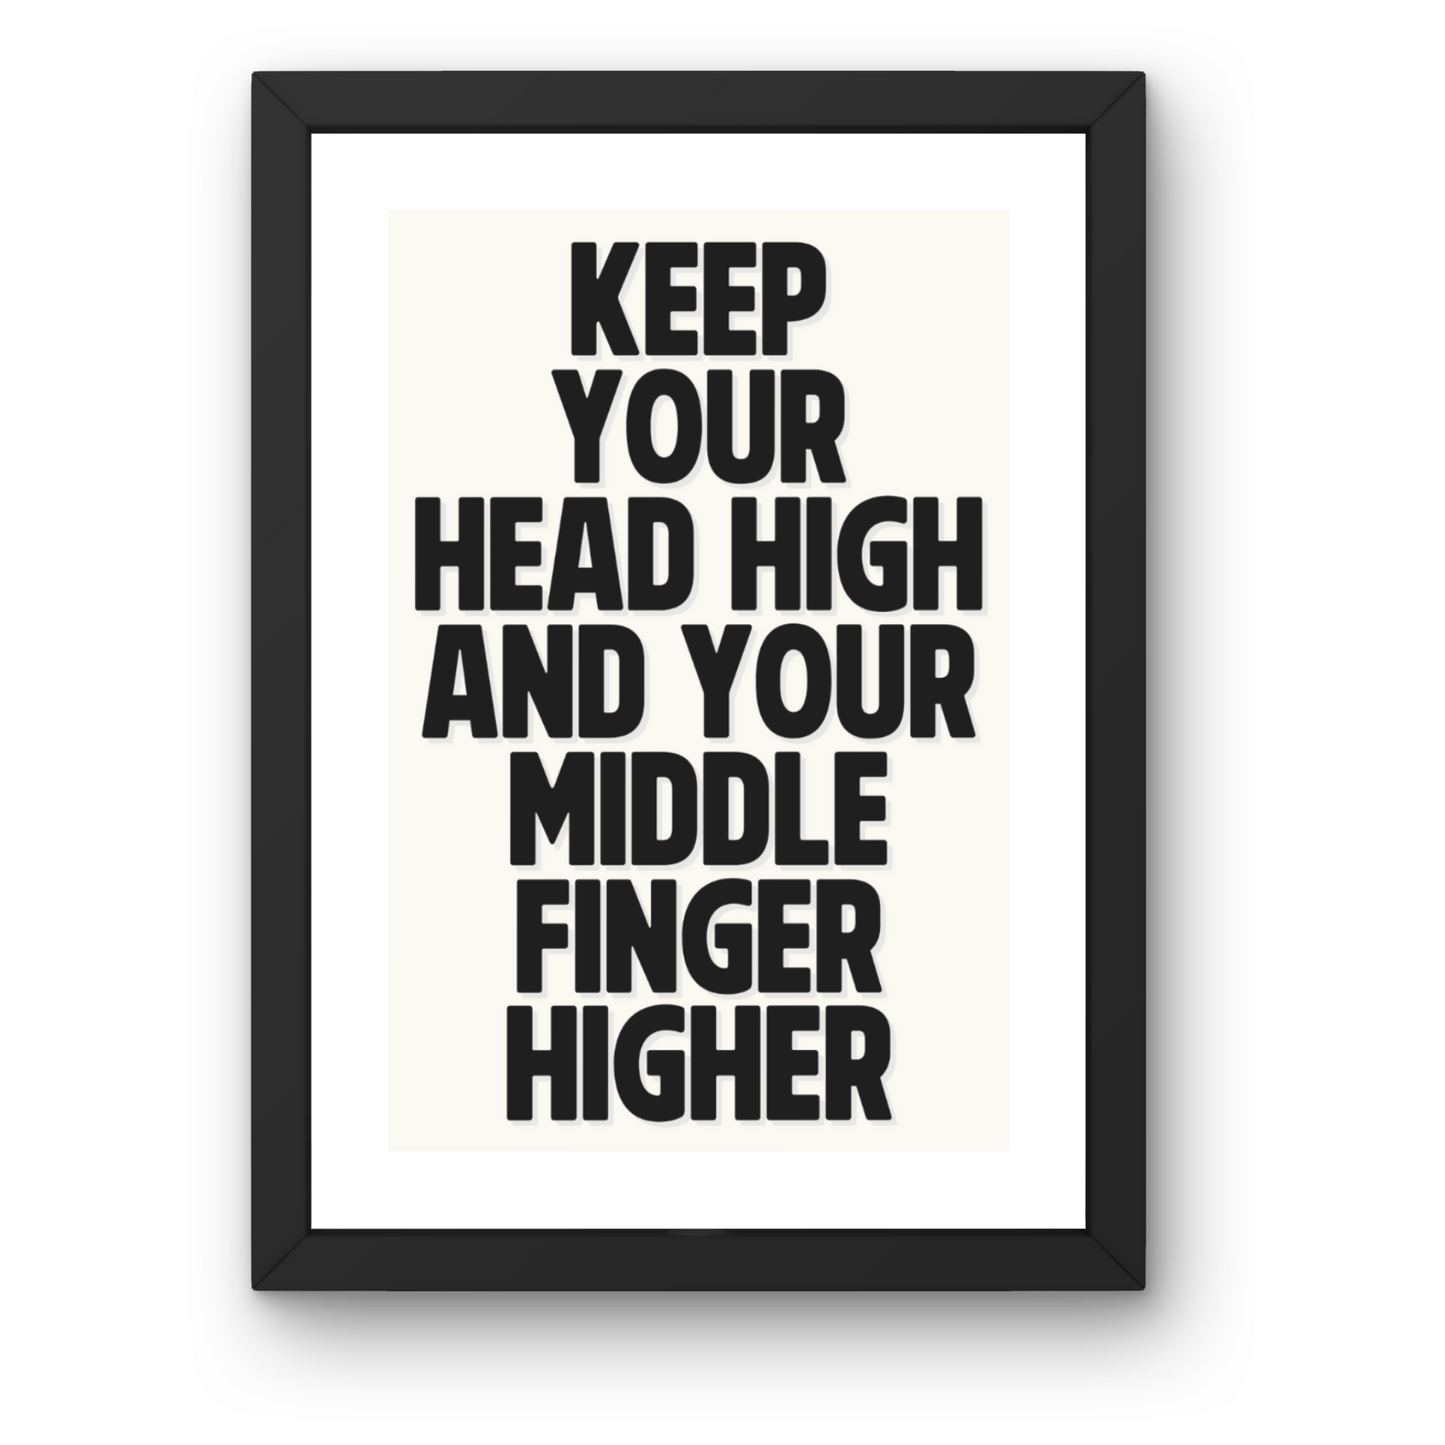 Keep Your Head High and Your Middle Finger Higher Print - Motivational Typography Art